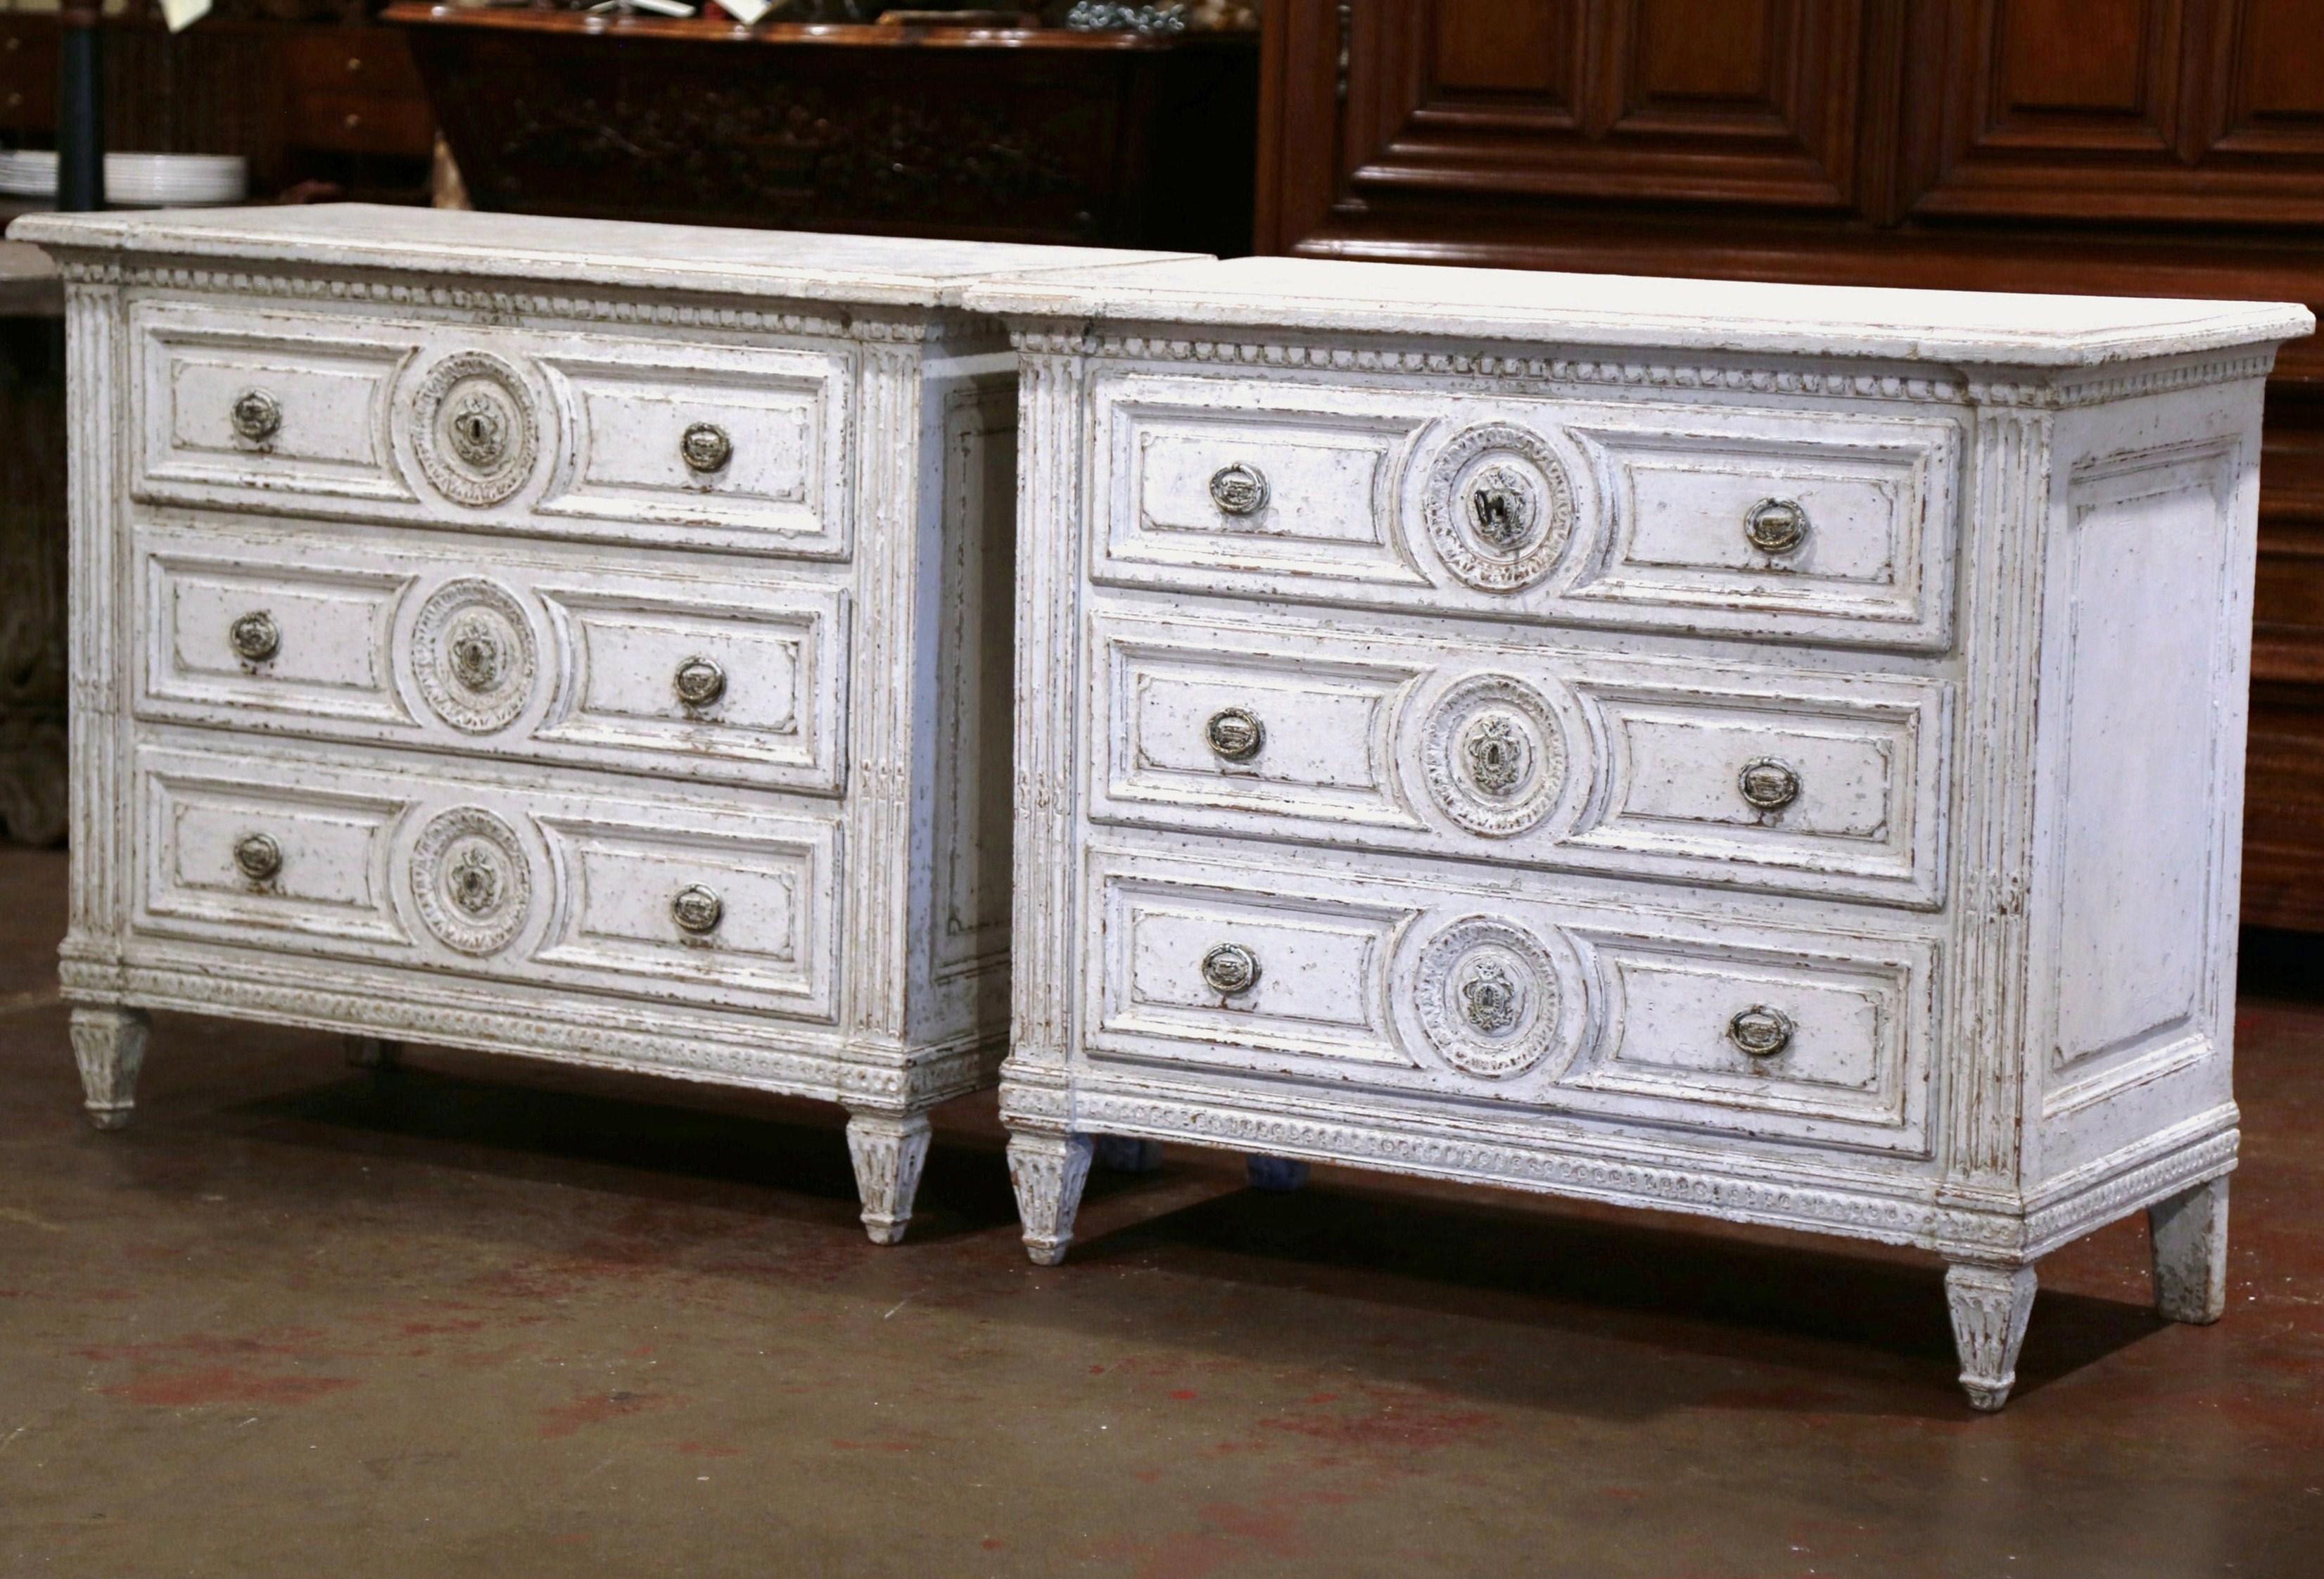 Use this elegant pair of antique painted chests of drawers on either side of a mantel, on in an entry way. Crafted in France, circa 1860, each commode sits on tapered and fluted feet, and features detailed carved decor including a center round